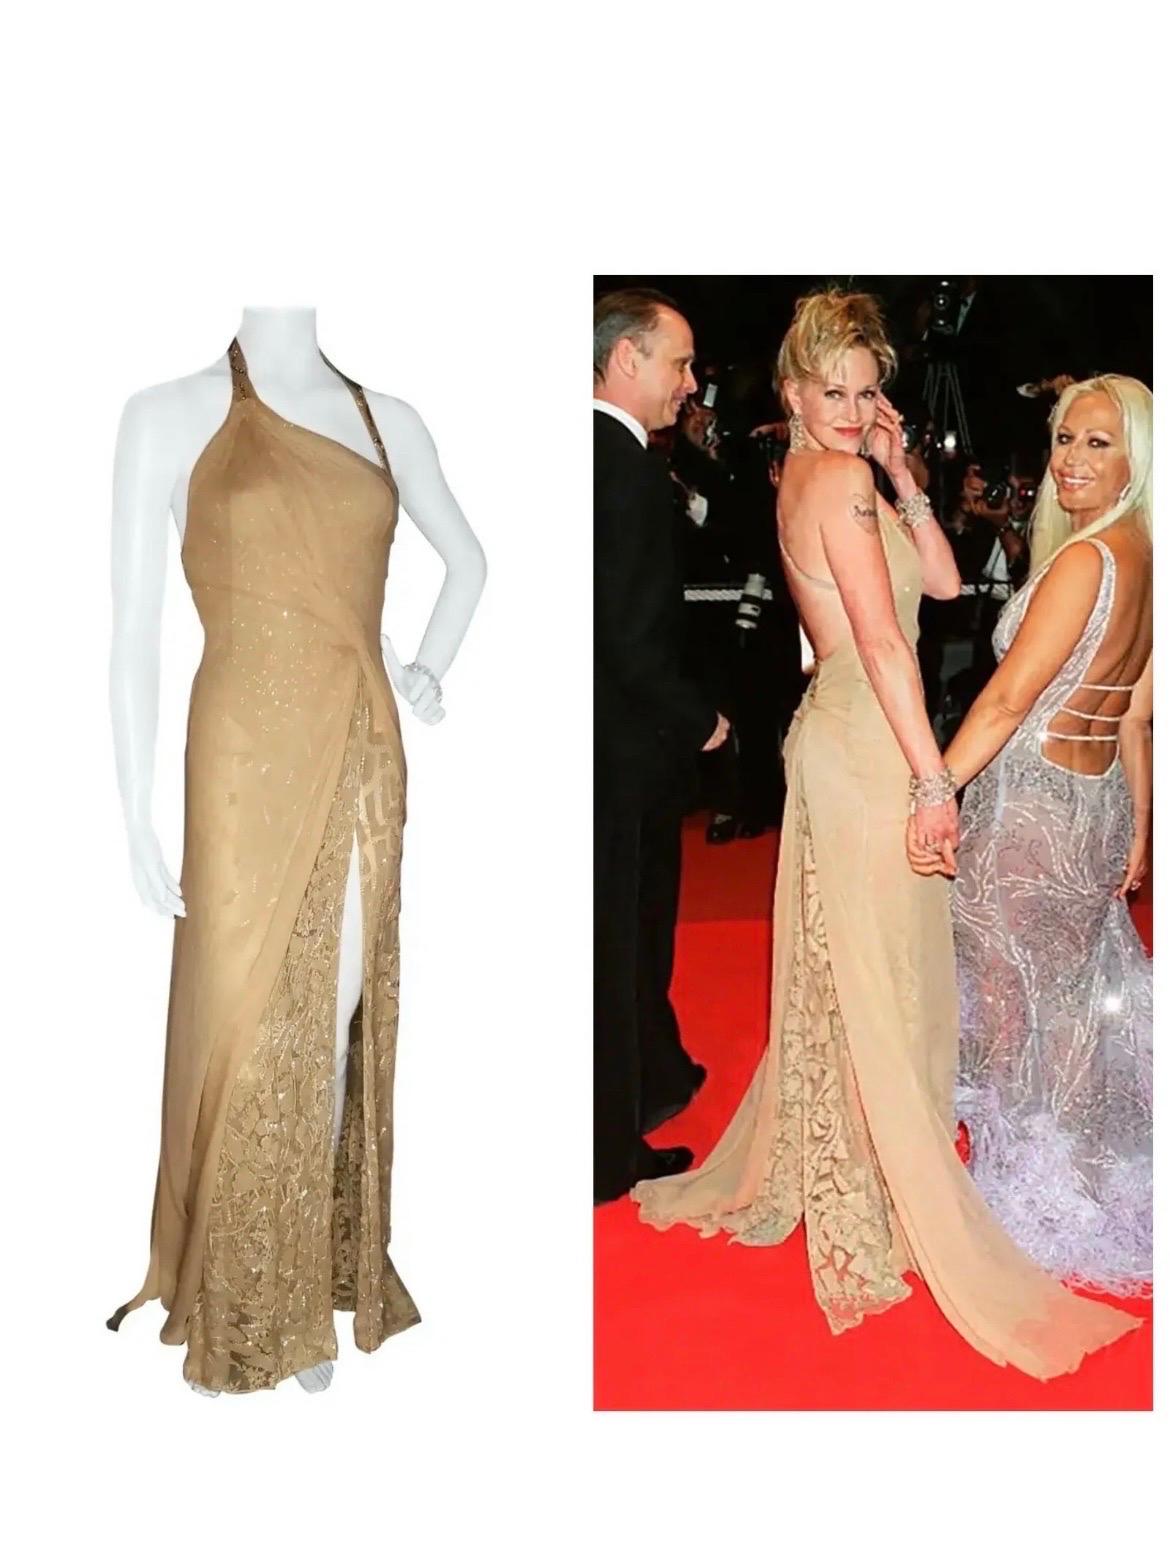 Vintage Versace Atelier Embellished Gown
Custom made for Melanie Griffith
Top layer is 100% chiffon silk
Second layer is lace with crystal embellished suede leather applique
Approximately size US 4
Excellent condition